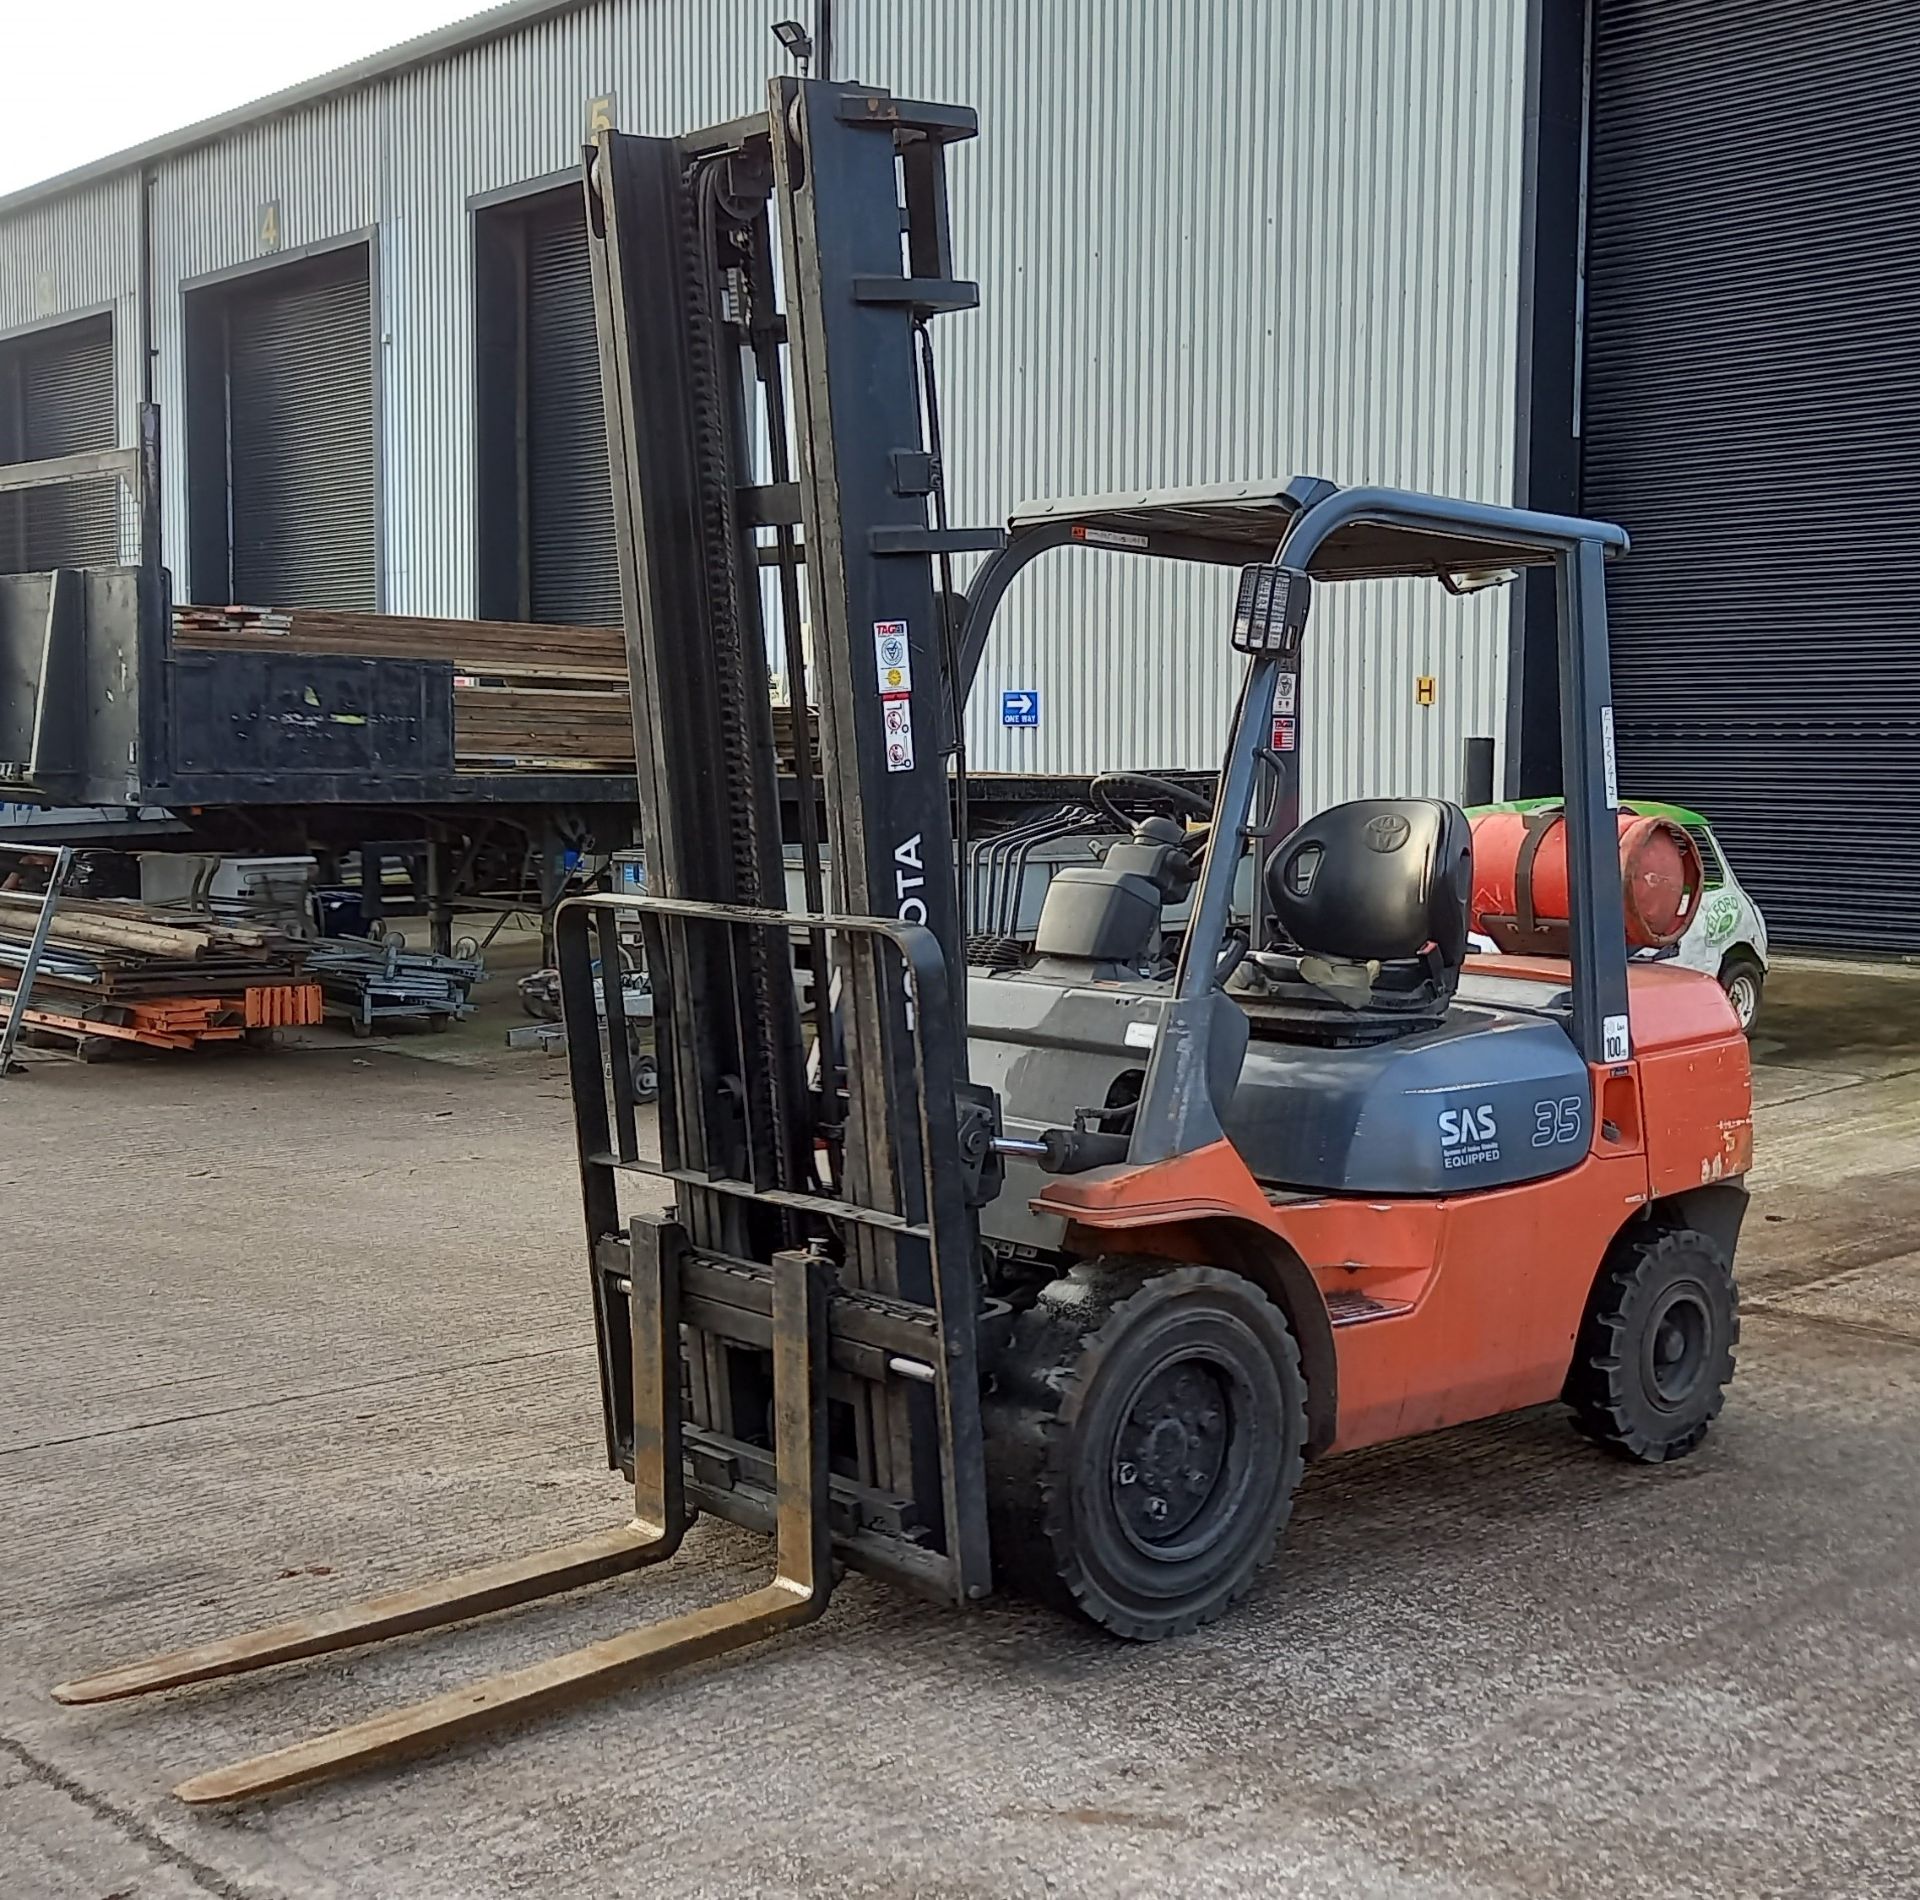 TOYOTA 3500KG RATED FORK LIFT TRUCK, MODEL: 02-7FSJF3S, YOM: 2006, HOURS: 10180 - Image 4 of 5